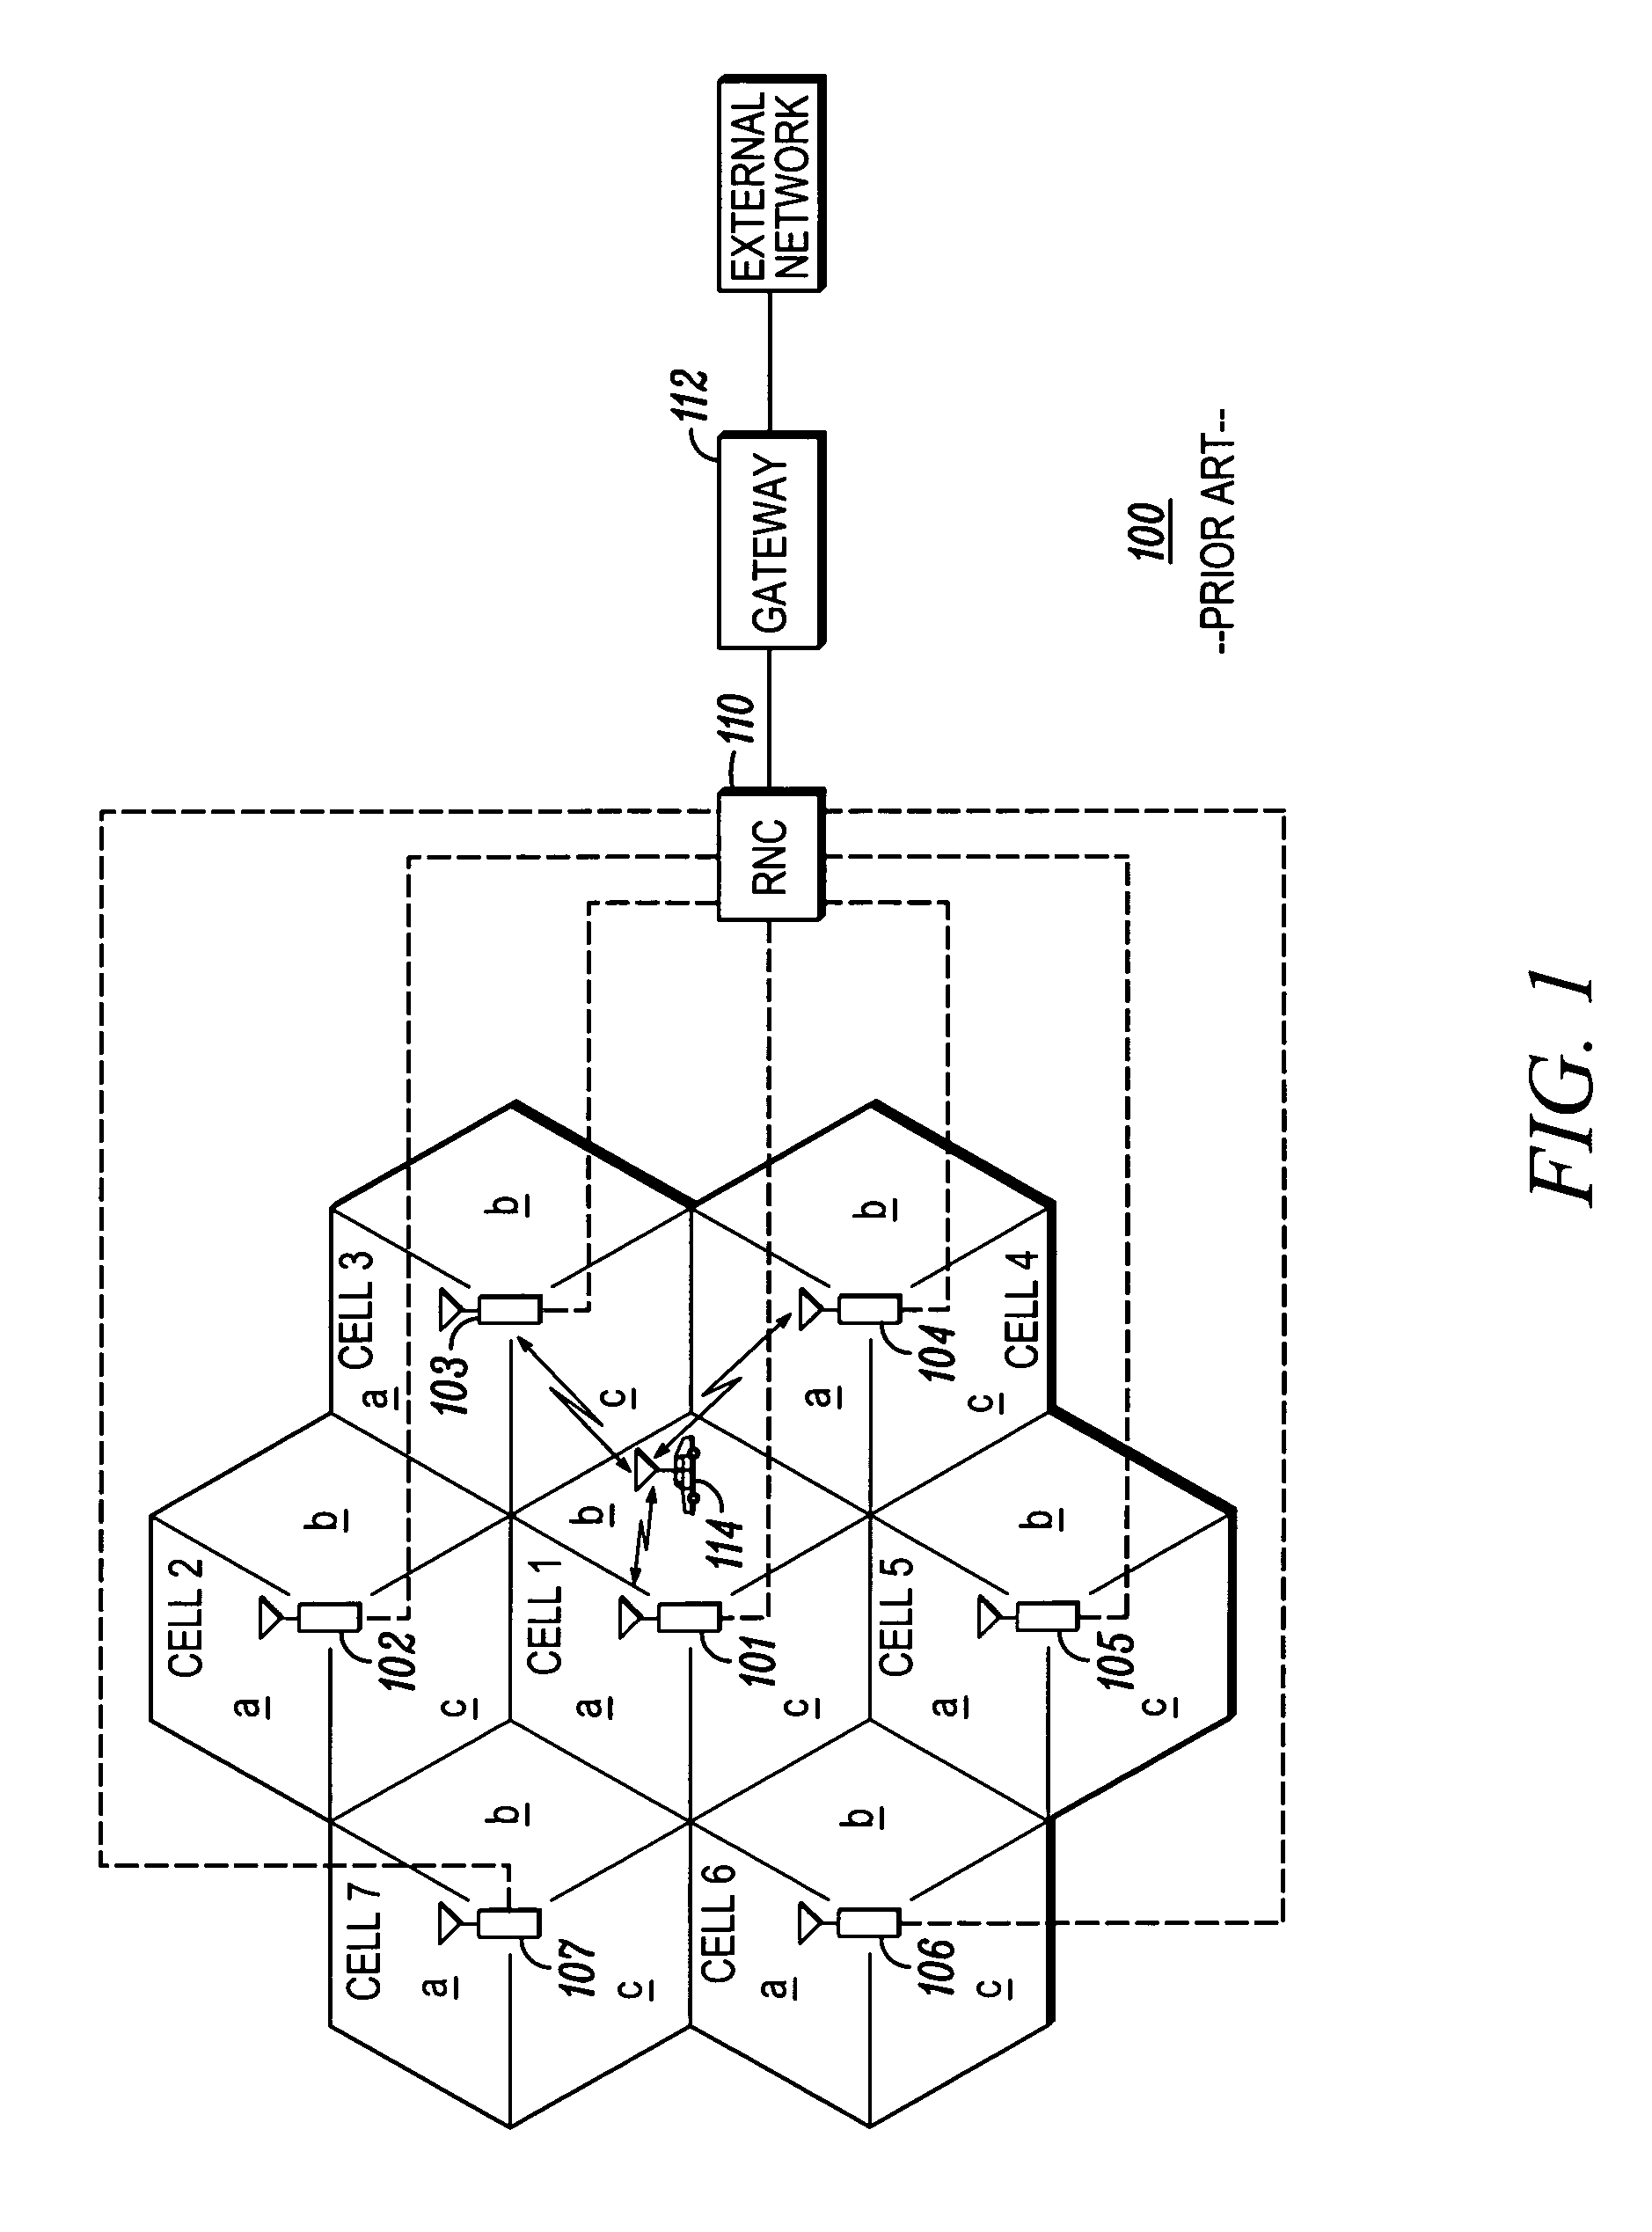 Buffer occupancy used in uplink scheduling for a communication device